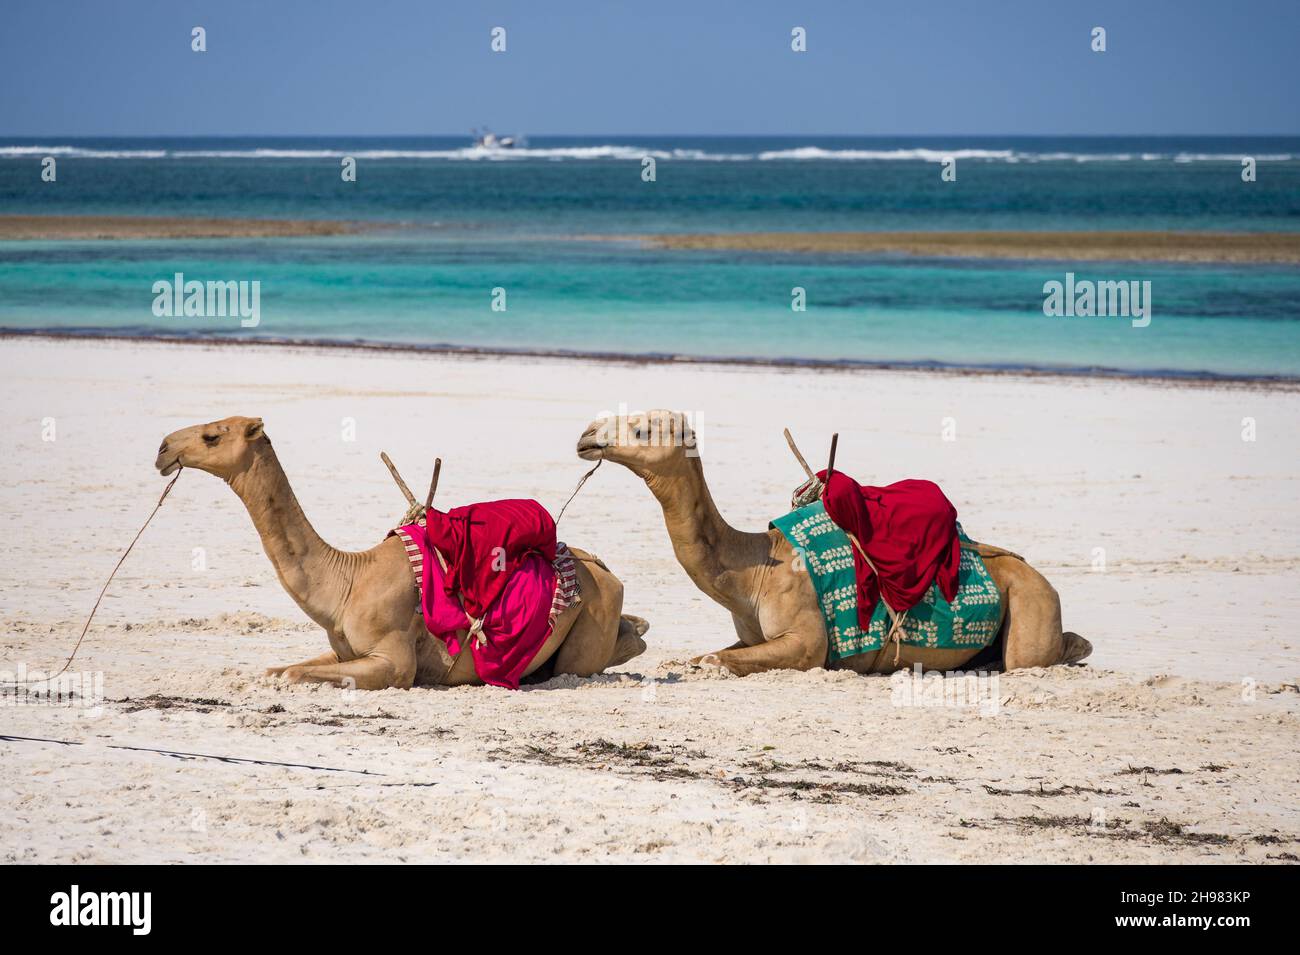 A pair of camels resting on white sand beach with Indian ocean in background, Diani, Kenya Stock Photo